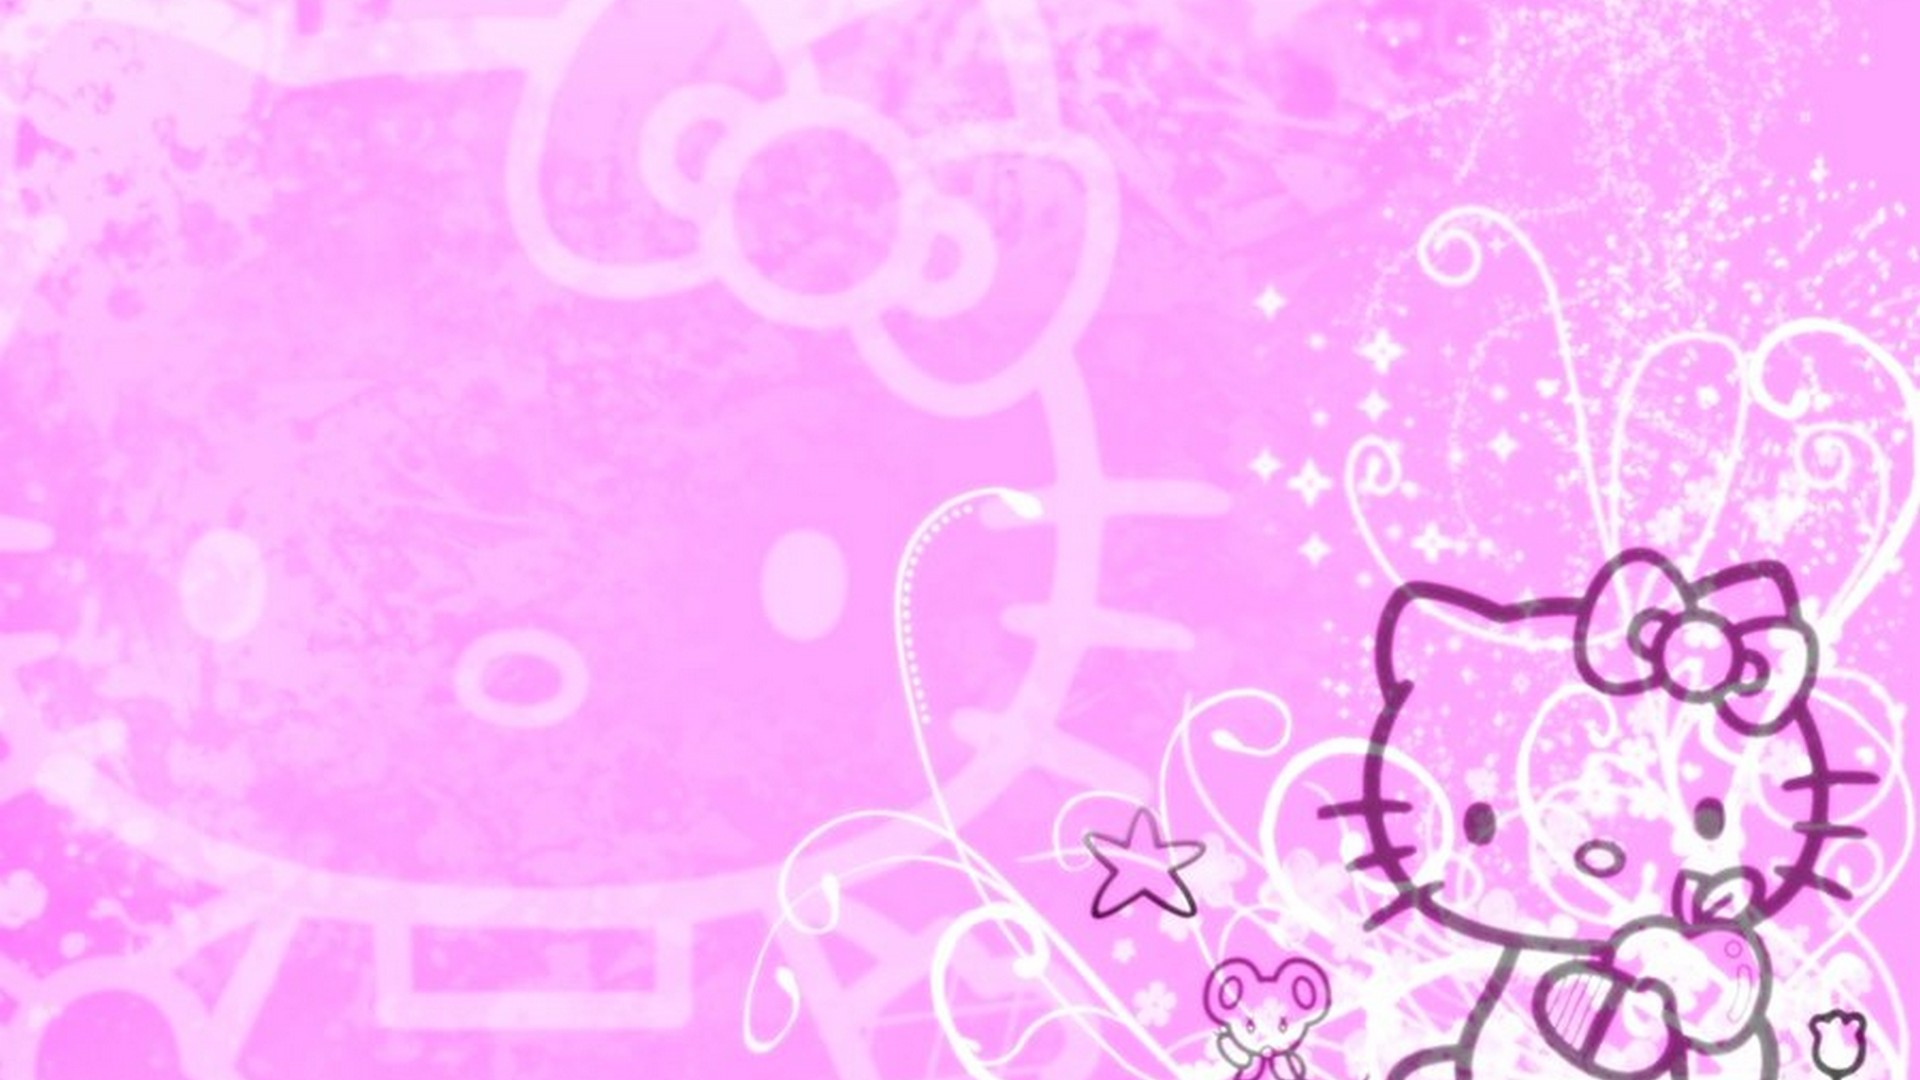 Hello Kitty Images Desktop Backgrounds 2021 Live Wallpaper Hd Are you seeking hello kitty wallpaper desktop background? hello kitty images desktop backgrounds